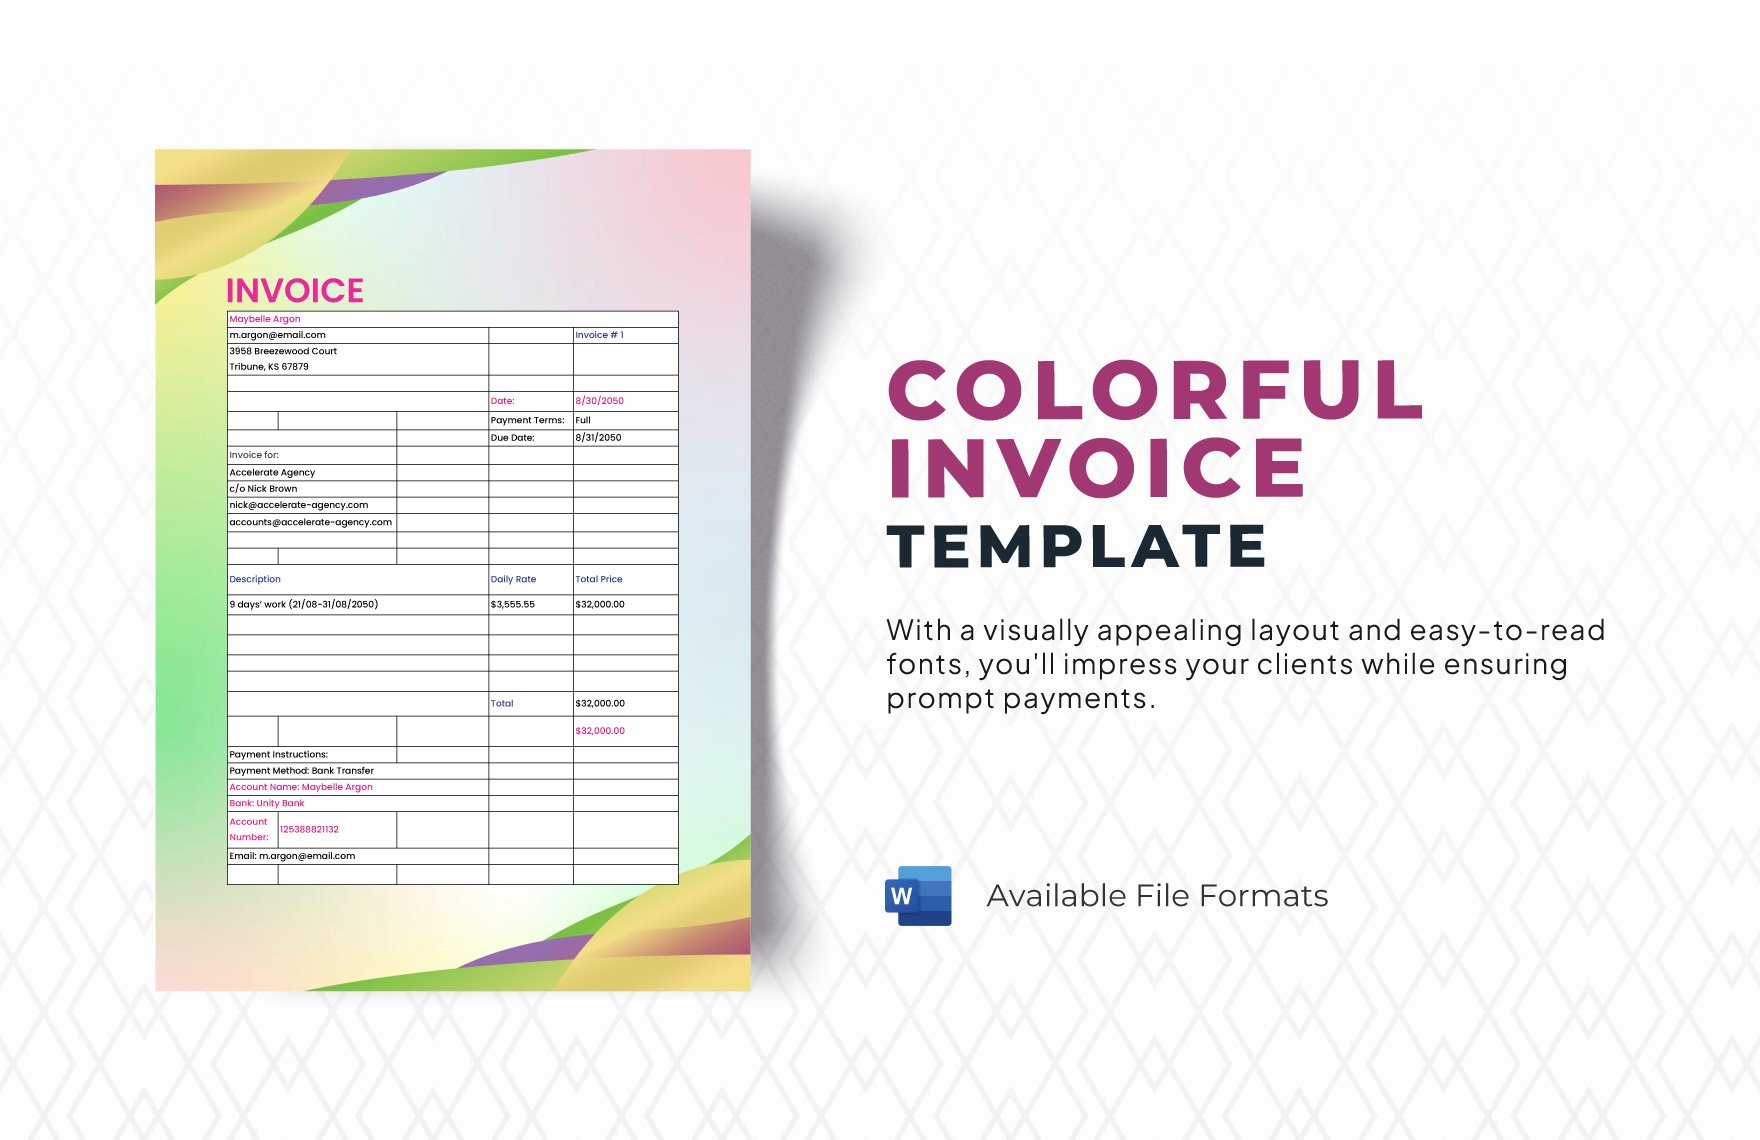 Free Colorful Invoice Template in Word